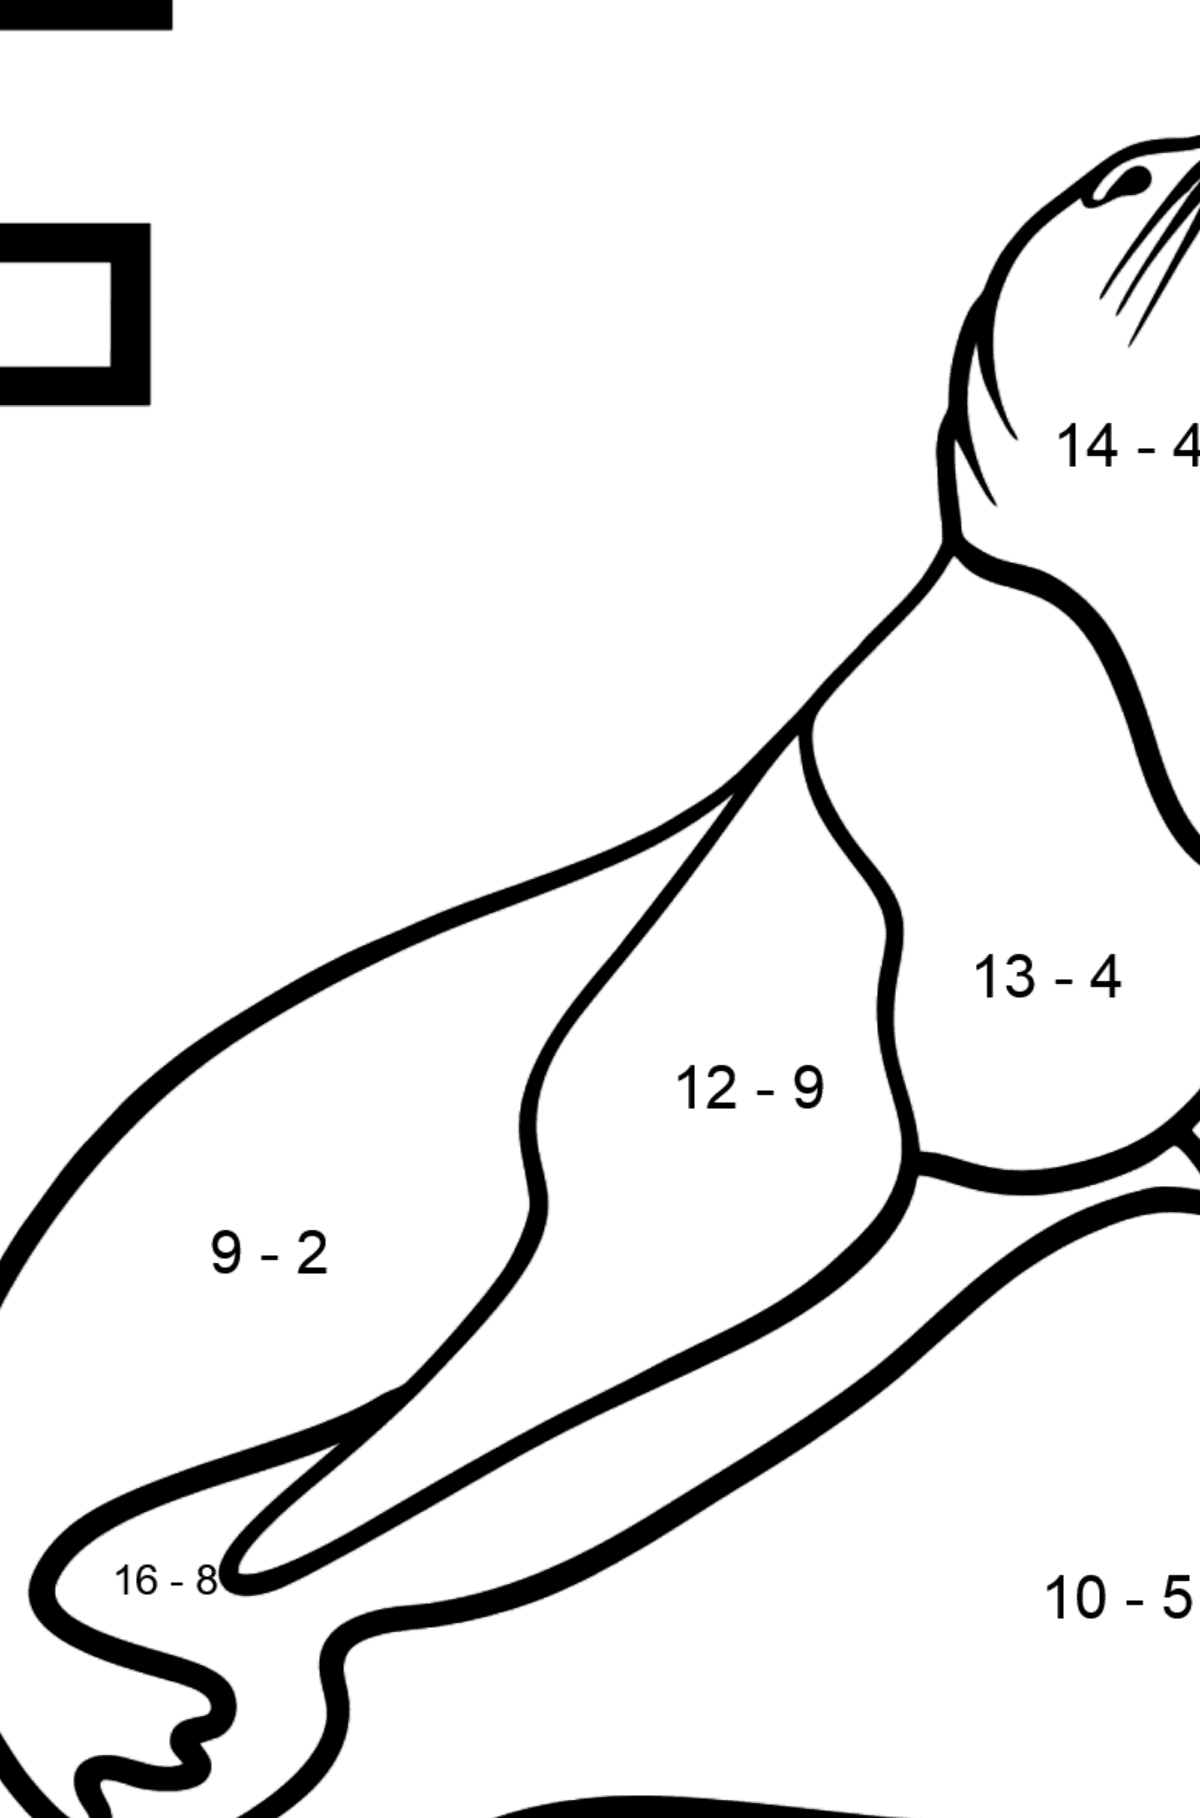 Spanish Letter F coloring pages - FOCA - Math Coloring - Subtraction for Kids